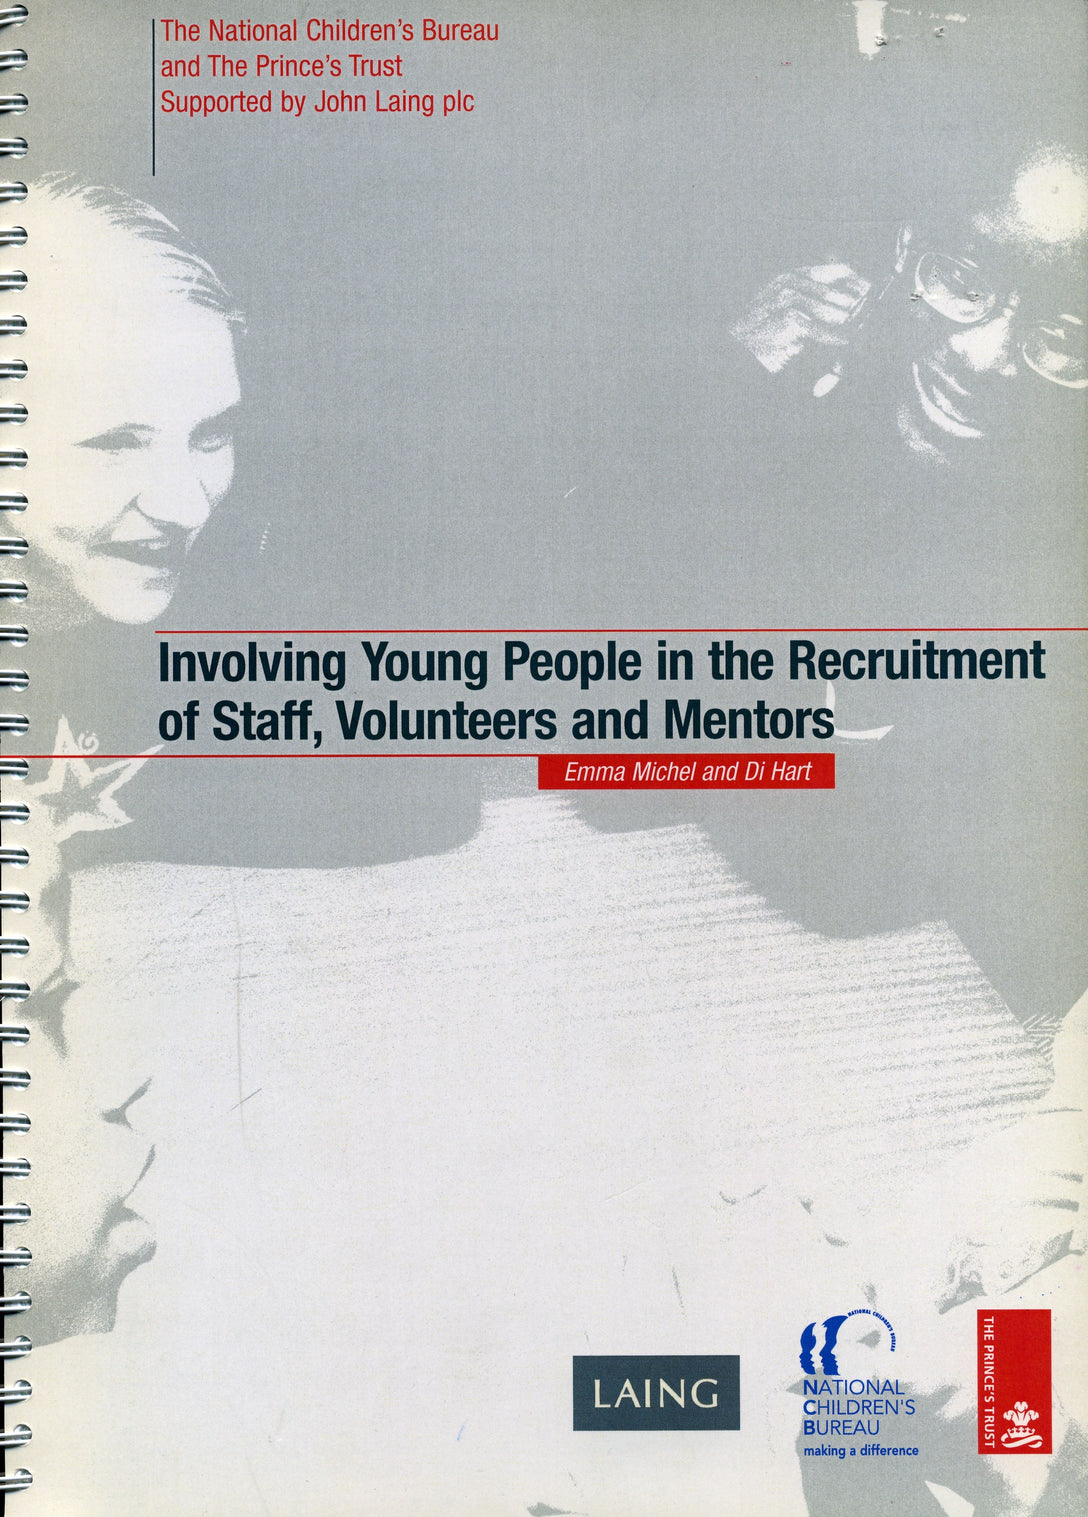 Involving Young People in the Recruitment of Staff, Volunteers and Mentors by Di Hart, Emma Michel